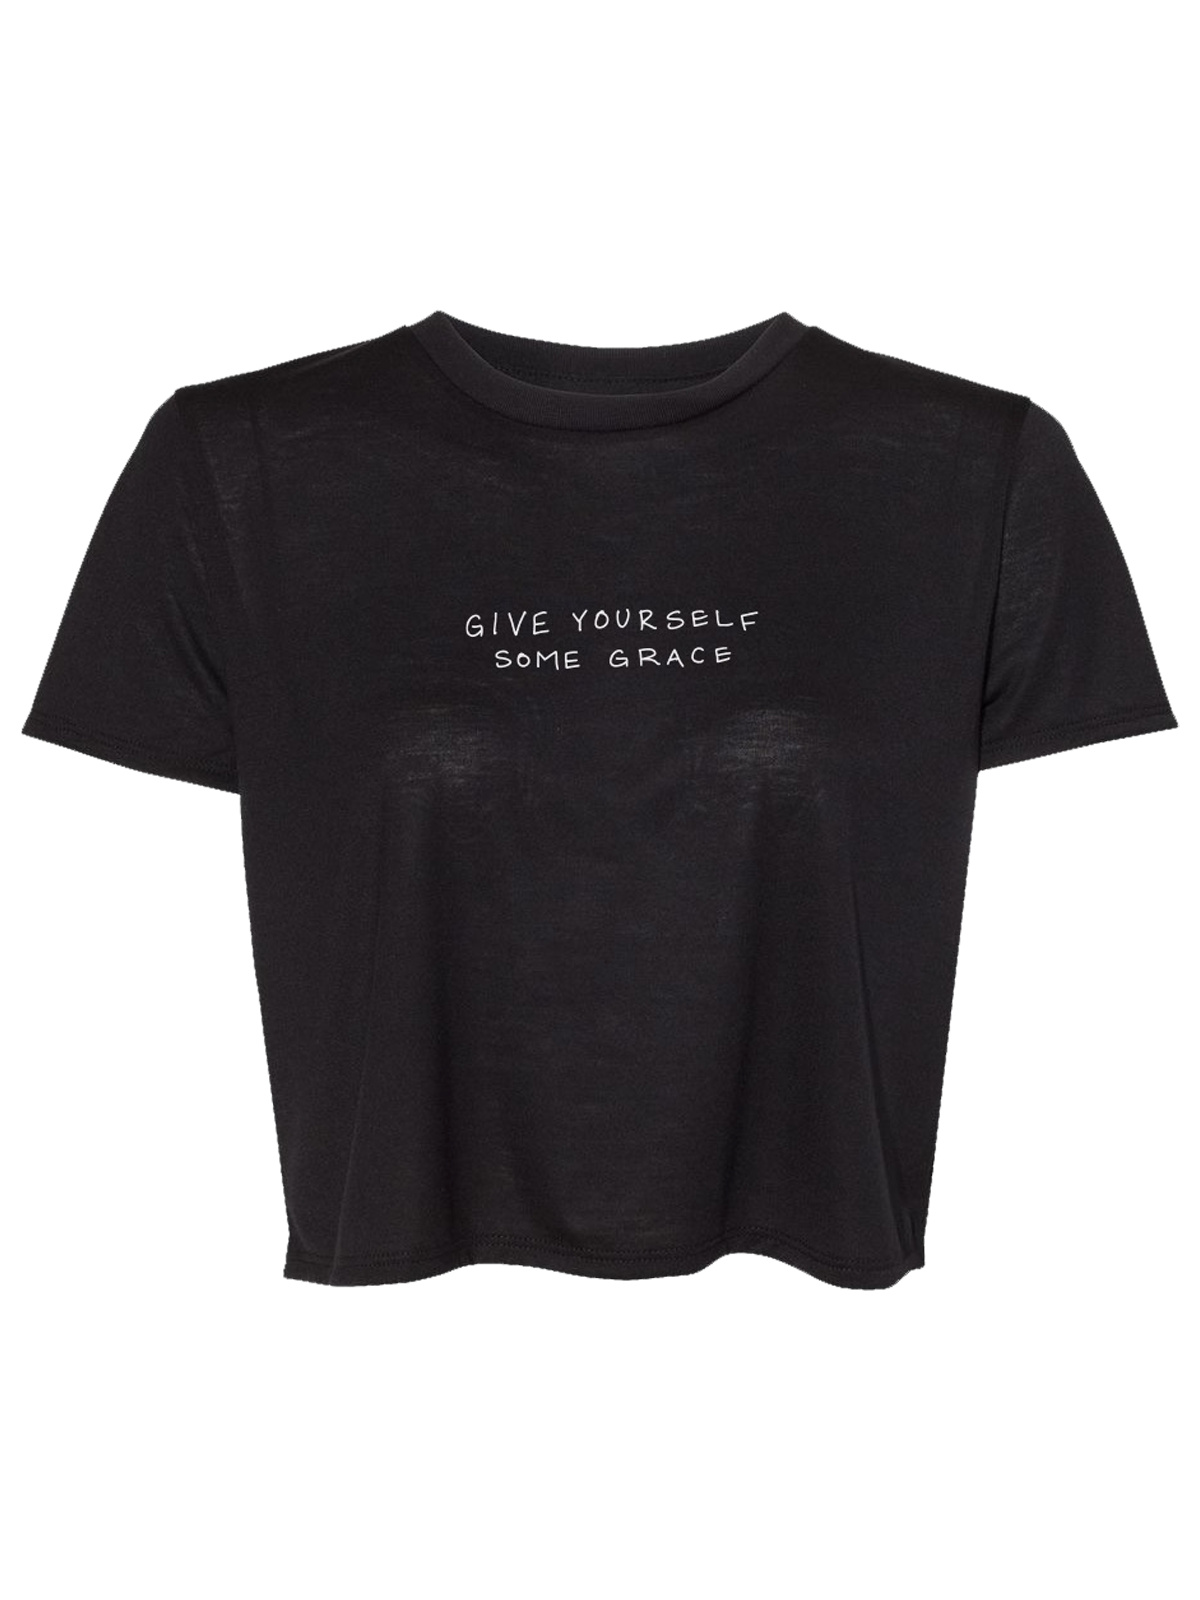 Give yourself some grace black cropped tee front Carly Pearce